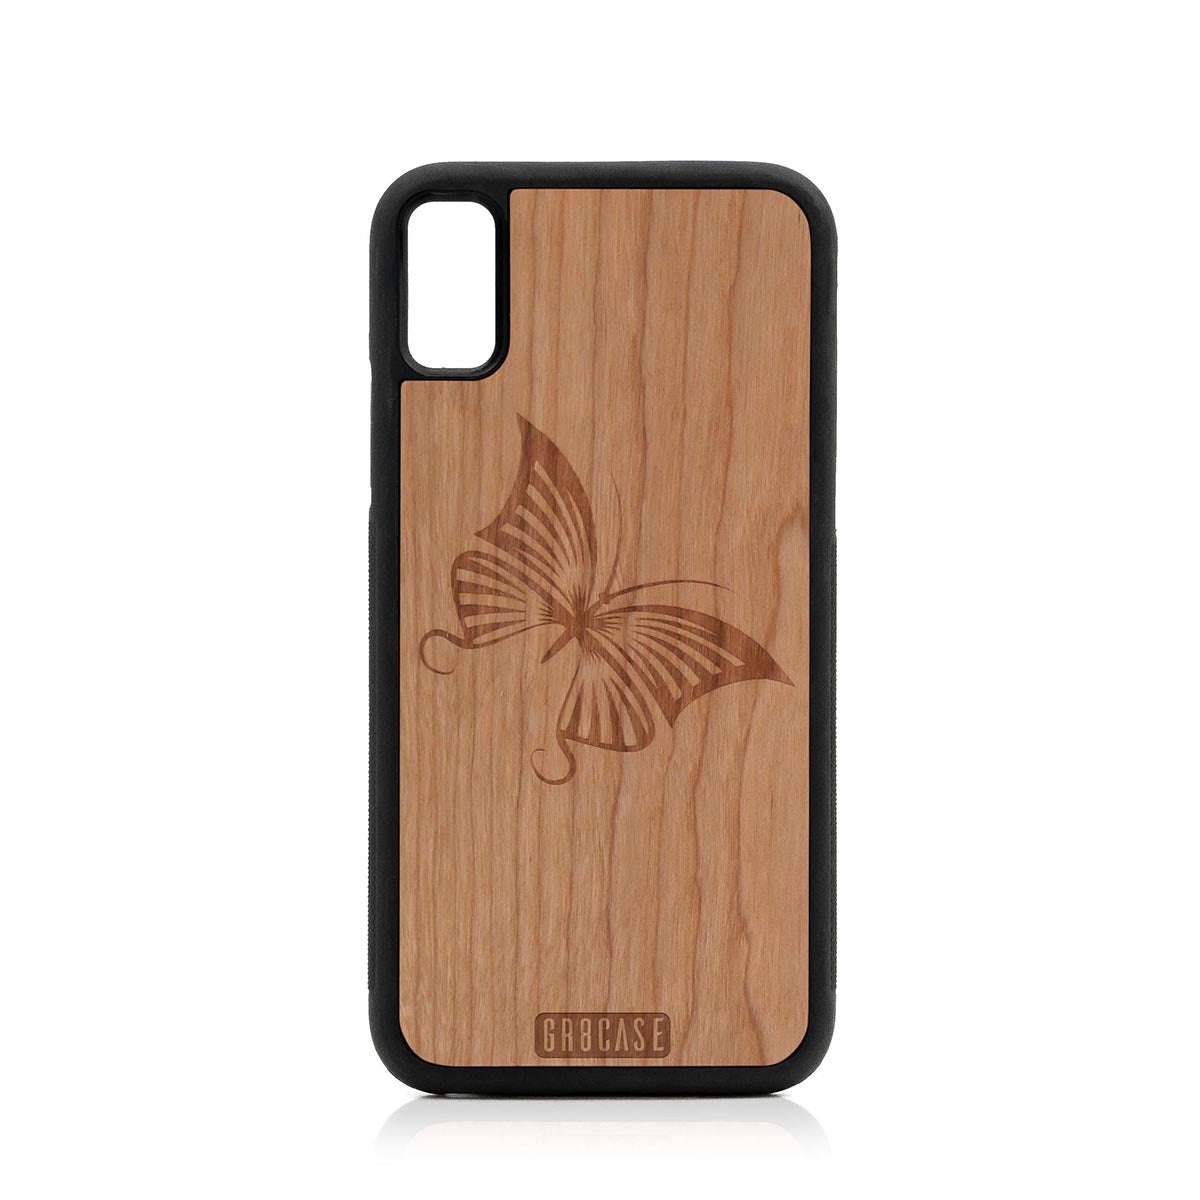 Butterfly Design Wood Case For iPhone XS Max by GR8CASE